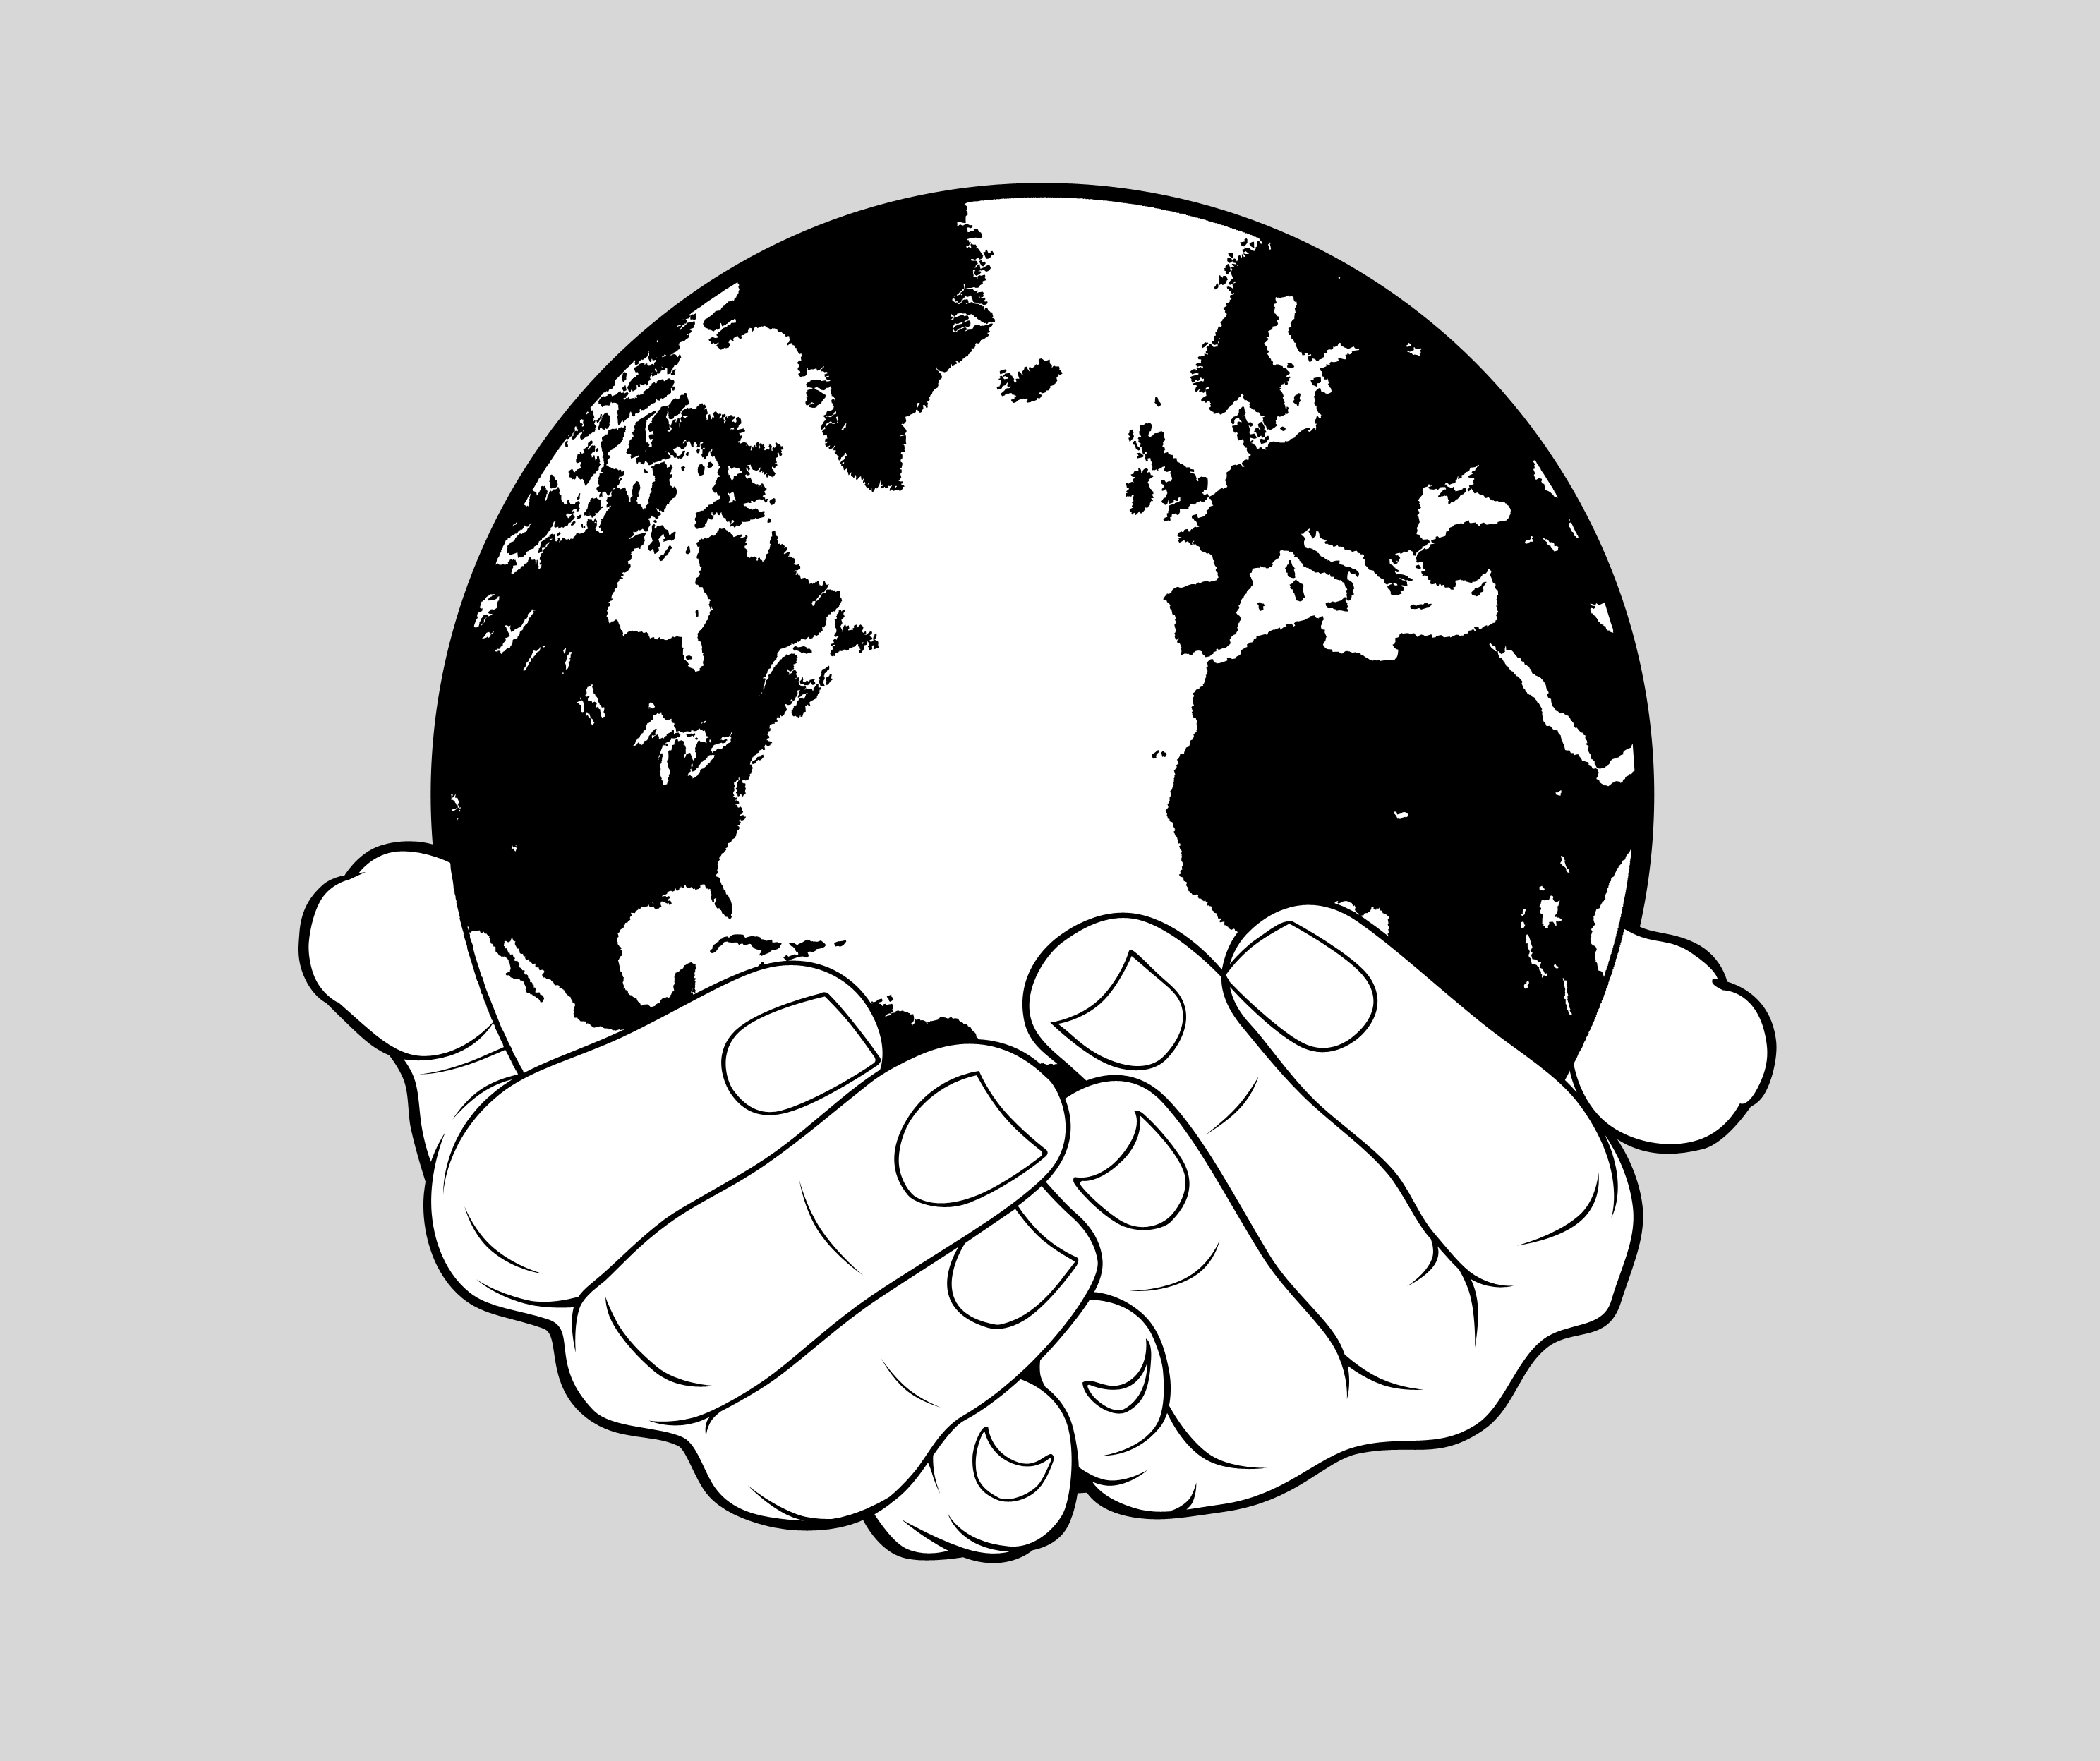 8 Best Images of World In Hands Clip Art.